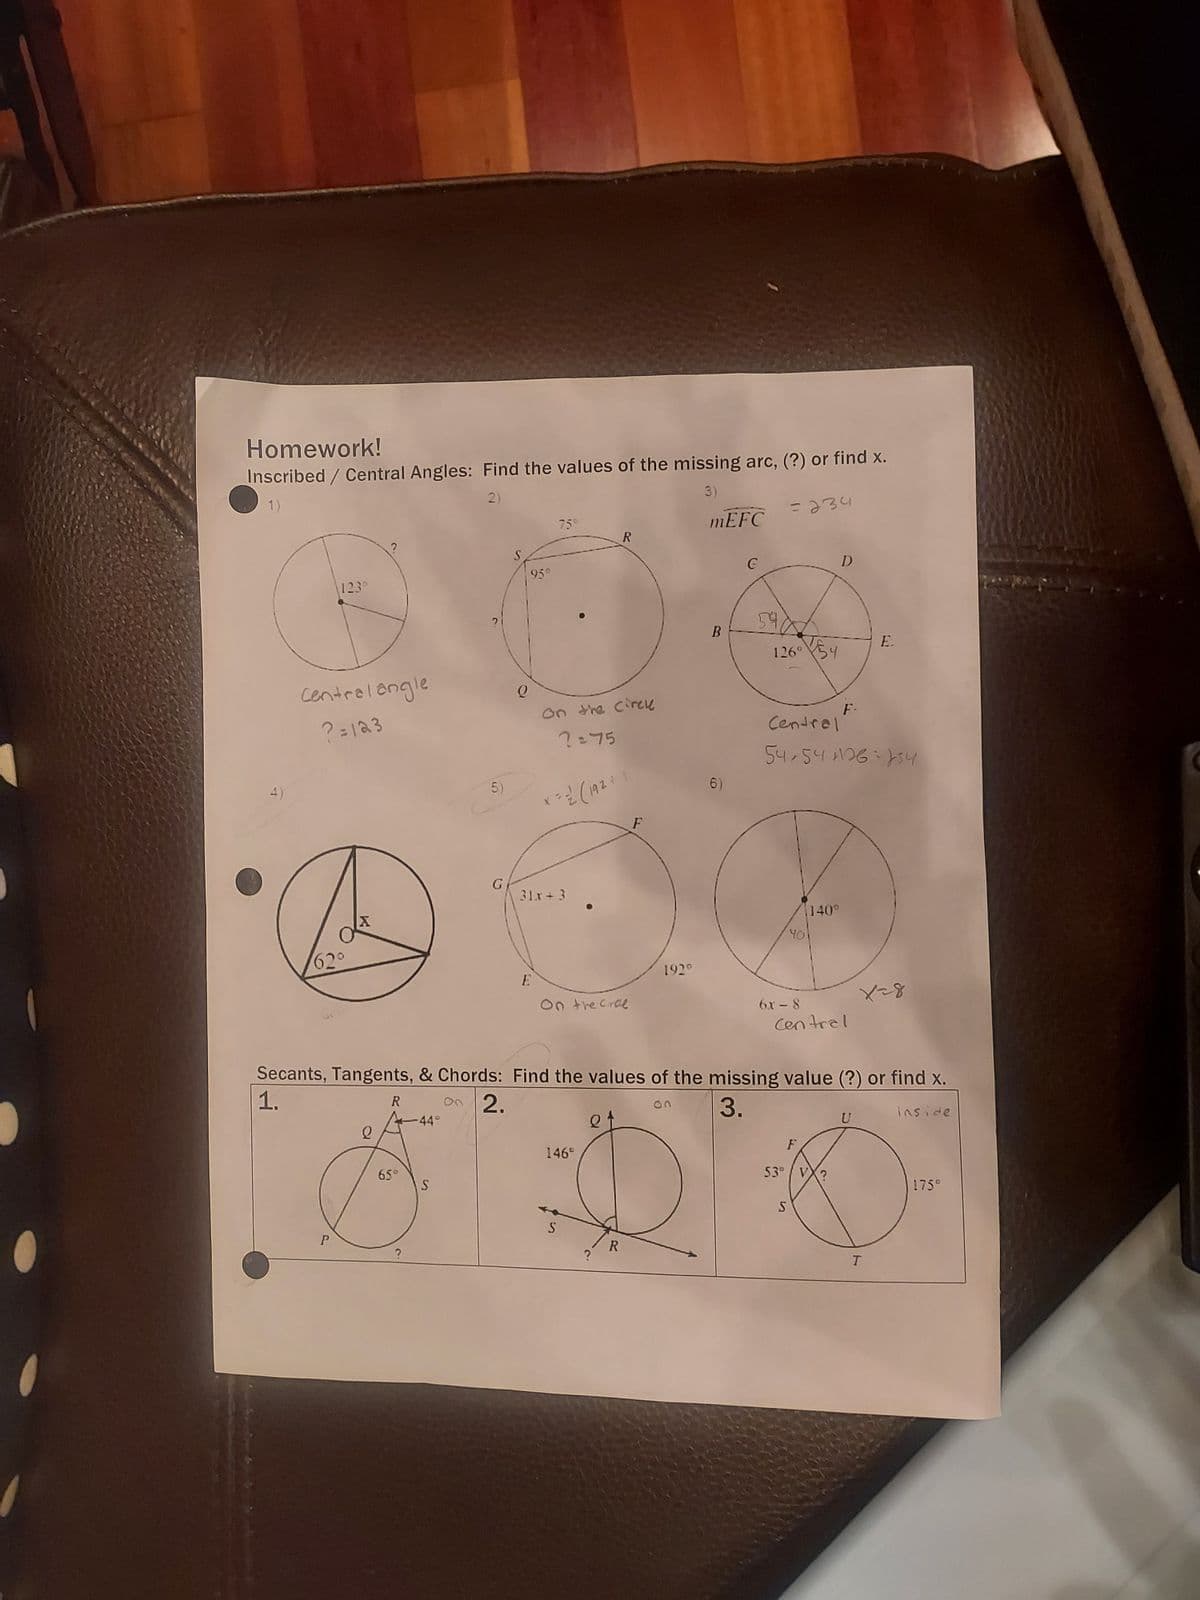 Homework!
Inscribed / Central Angles: Find the values of the missing arc, (?) or find x.
2)
3)
1)
4)
1230
Central angle
?=123
62°
P
K
65°
-44°
5)
S
G
Q
95°
750
On the circle
2=75
1 = 2/2 ( 192 + 1
31x+3
E
On the orde
146°
S
R
O
?
R
F
192⁰
mEFC
B
6)
G
54
126⁰54
Secants, Tangents, & Chords: Find the values of the missing value (?) or find x.
1.
R on 2.
3.
inside
= 234
53°
Central
54,54 126-134
40
S
140°
6x - 8
Central
F
D
F.
?
E.
U
X-8
T
175°